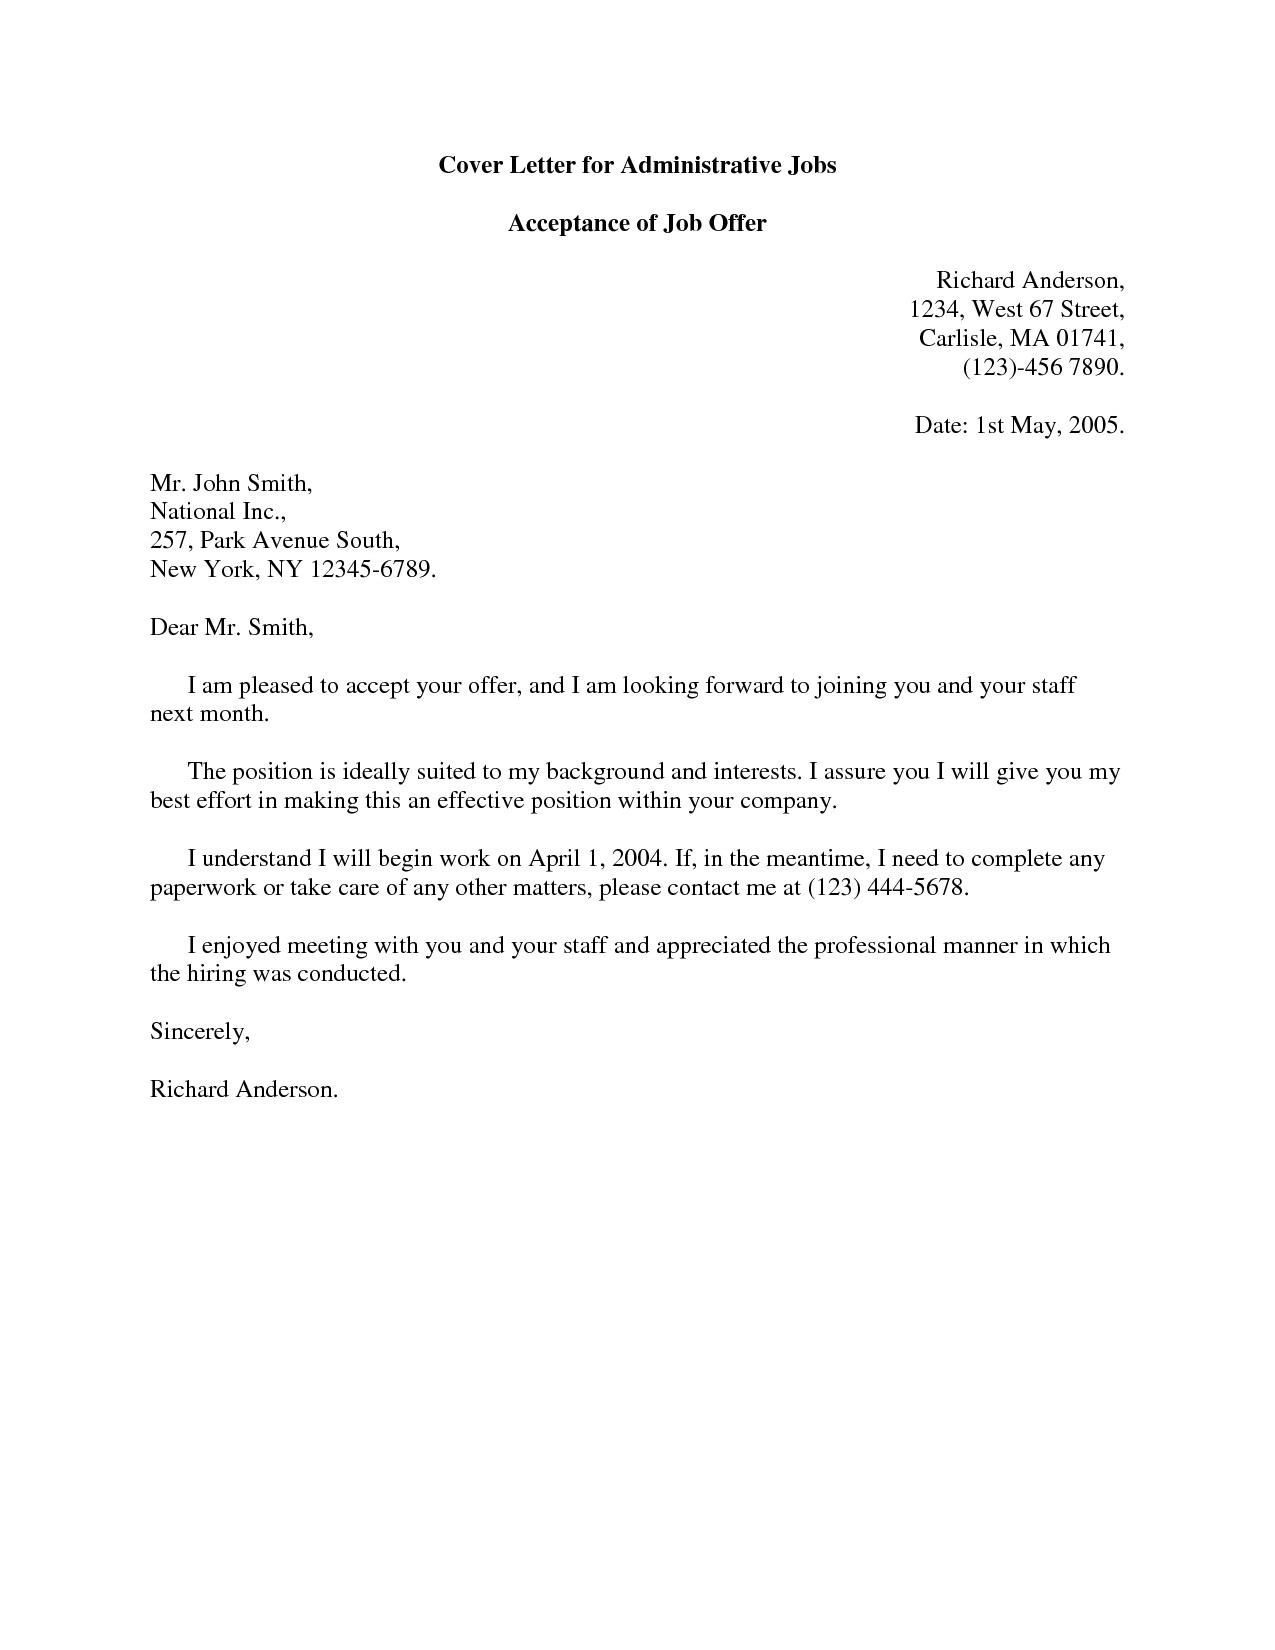 acceptance of job offer cover letter sample for administrative assistant